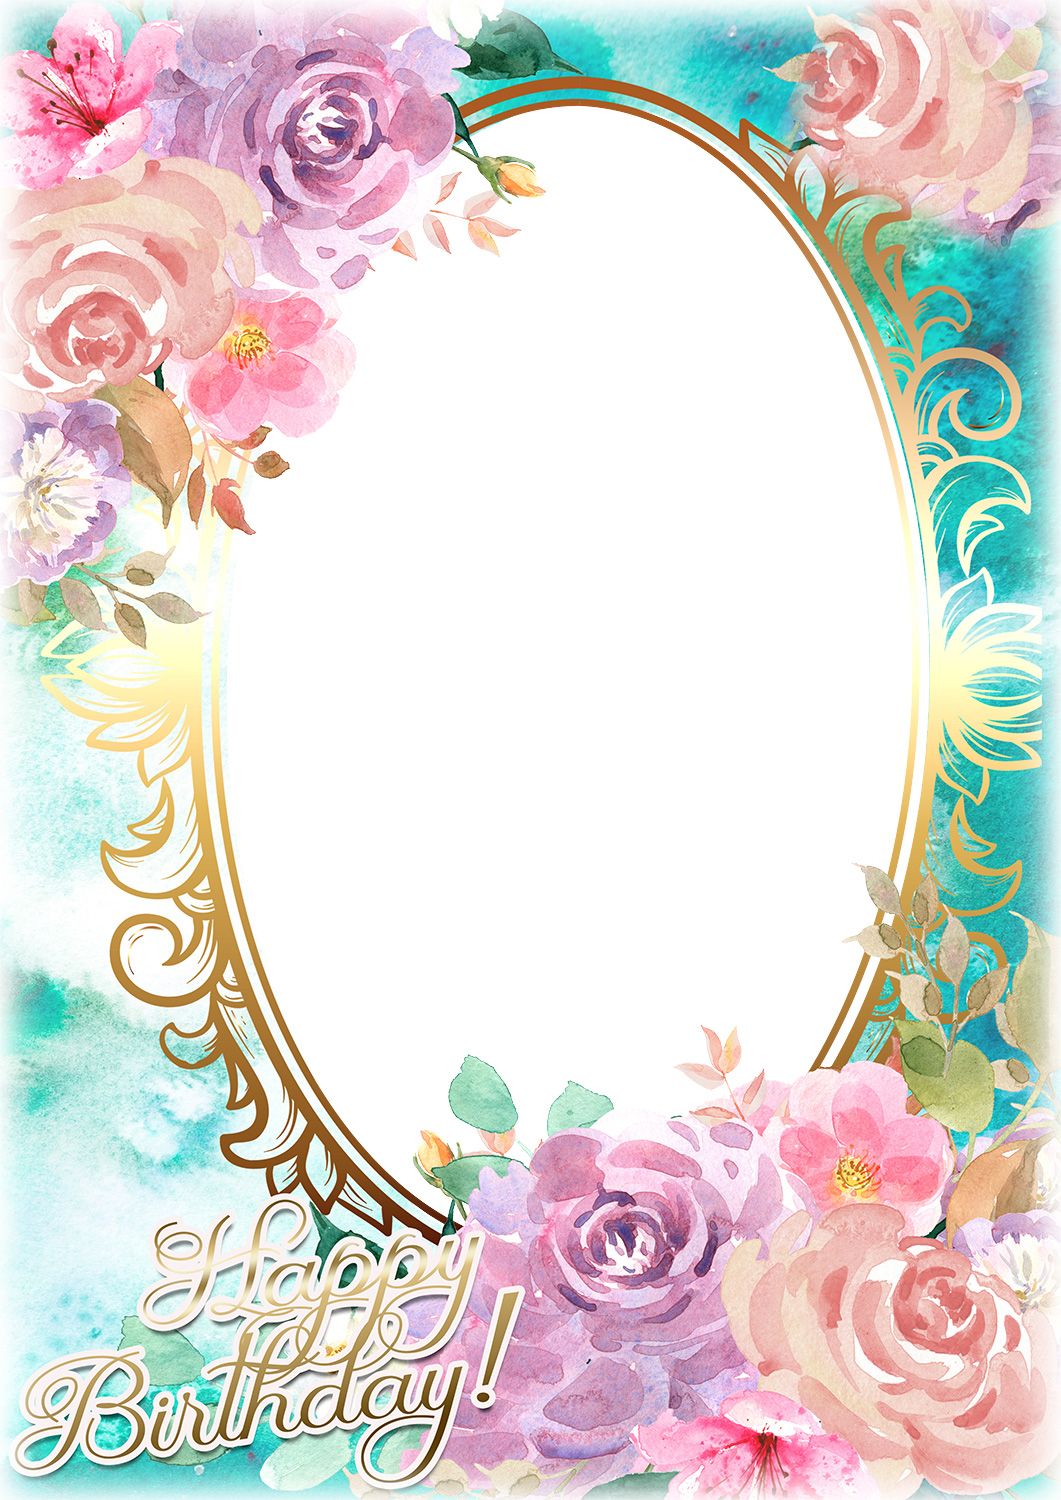 Watercolor Based Birthday Greeting Card Photo Frame Design